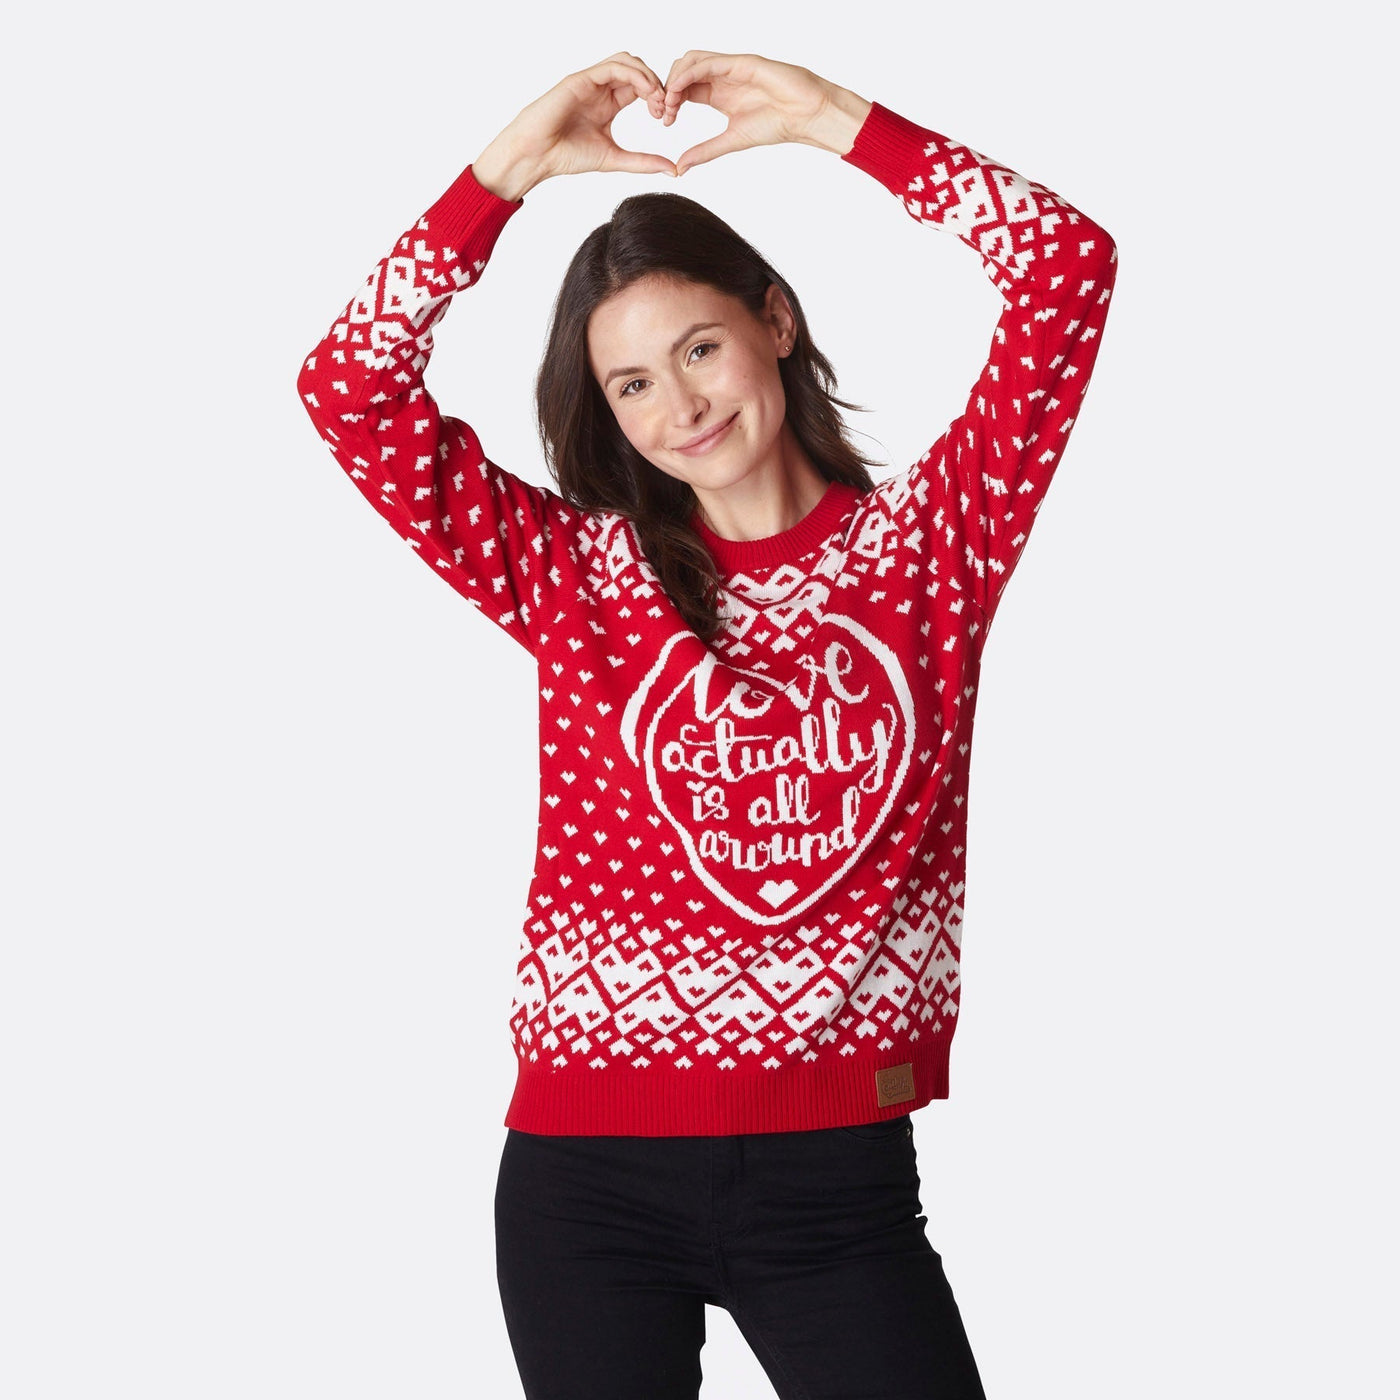 Love actually is all around Julesweater Dame